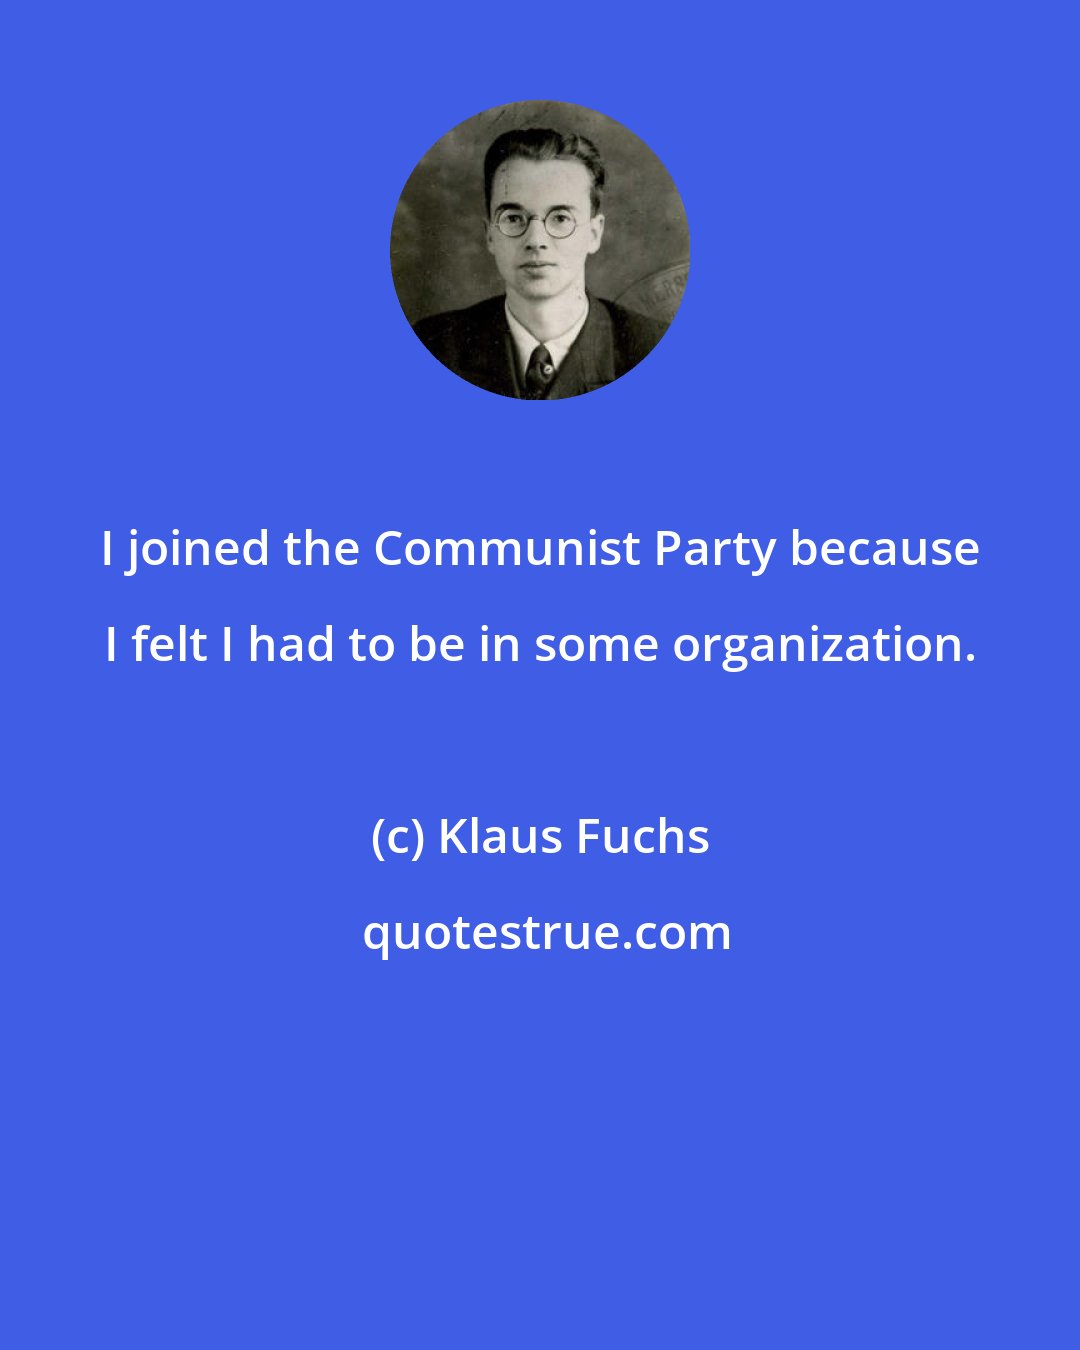 Klaus Fuchs: I joined the Communist Party because I felt I had to be in some organization.